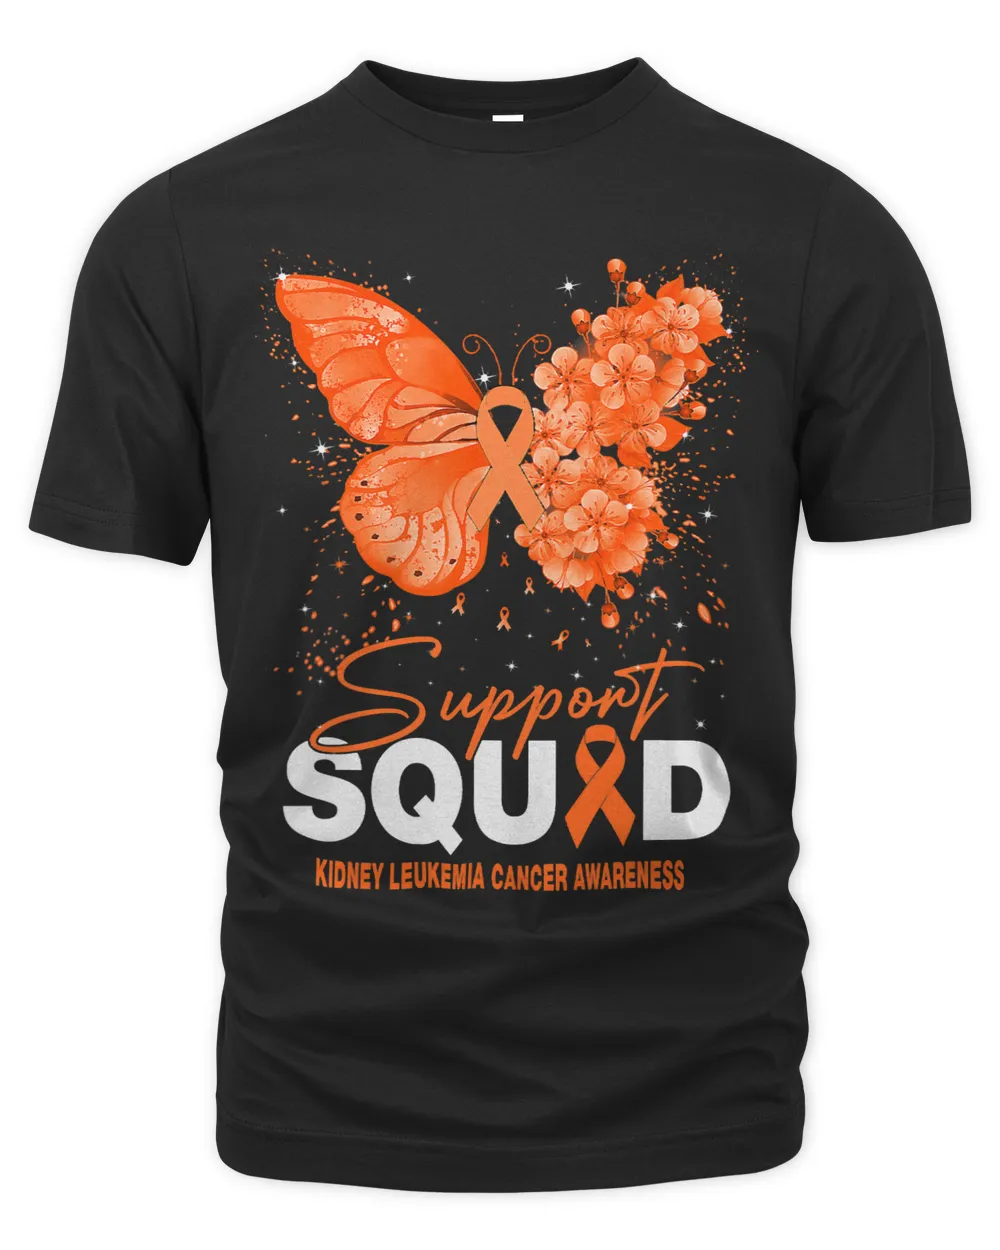 Kidney Leukemia Cancer Awareness Support Squad Butterfly